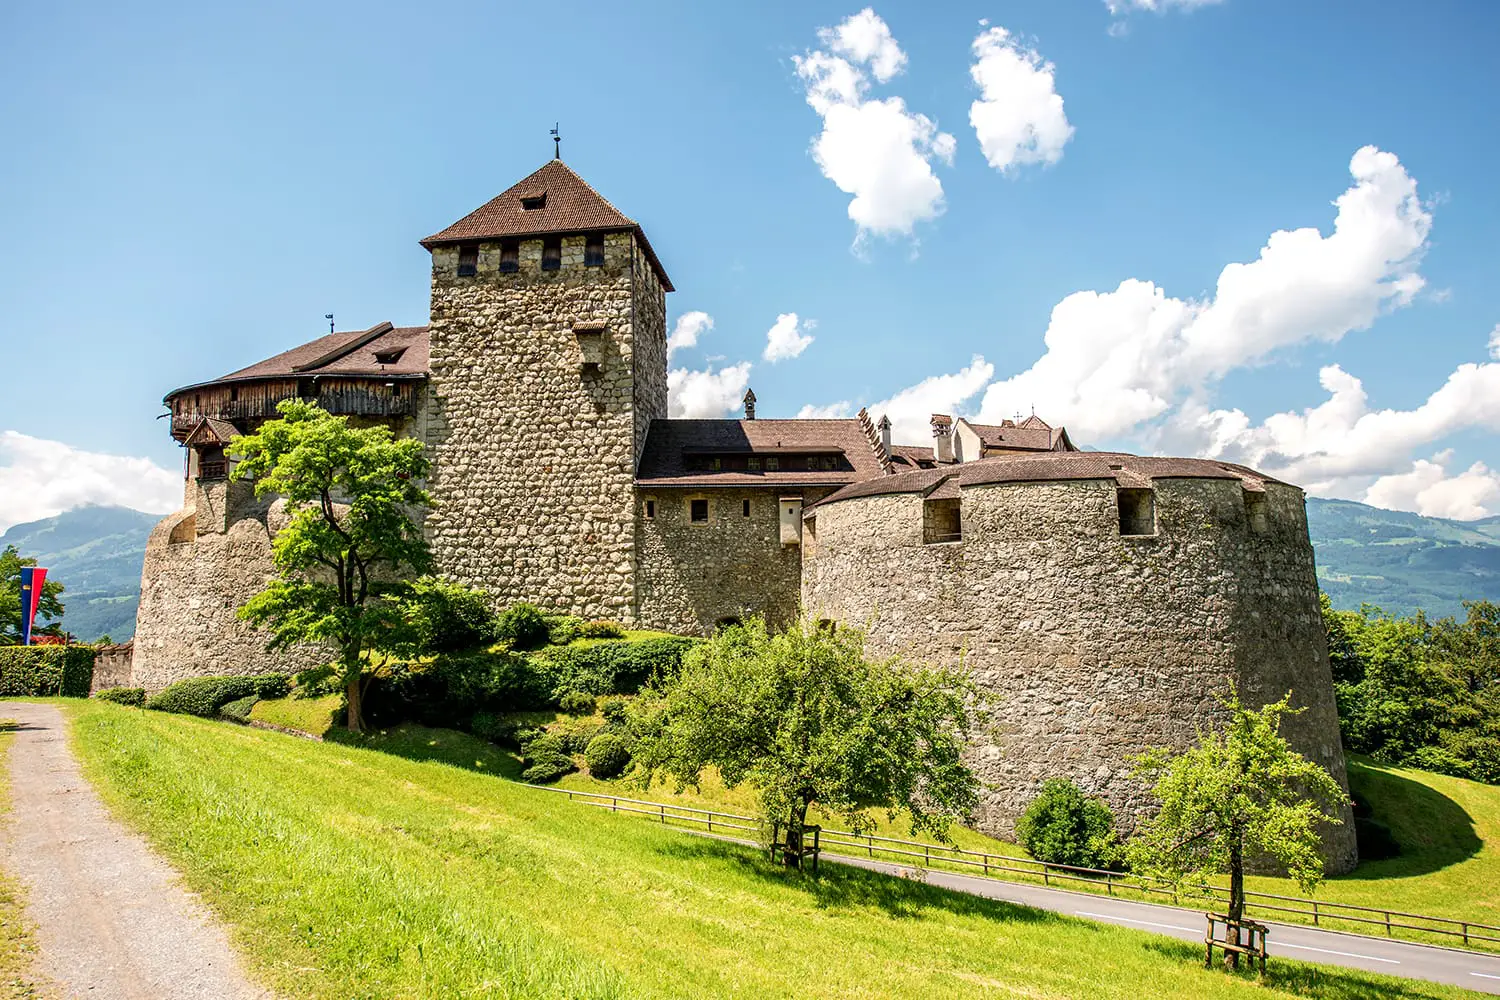 Landscape view on Vaduz castle in the capital of Liechtenstein. This castle is the palace and official residence of the Prince of Liechtenstein